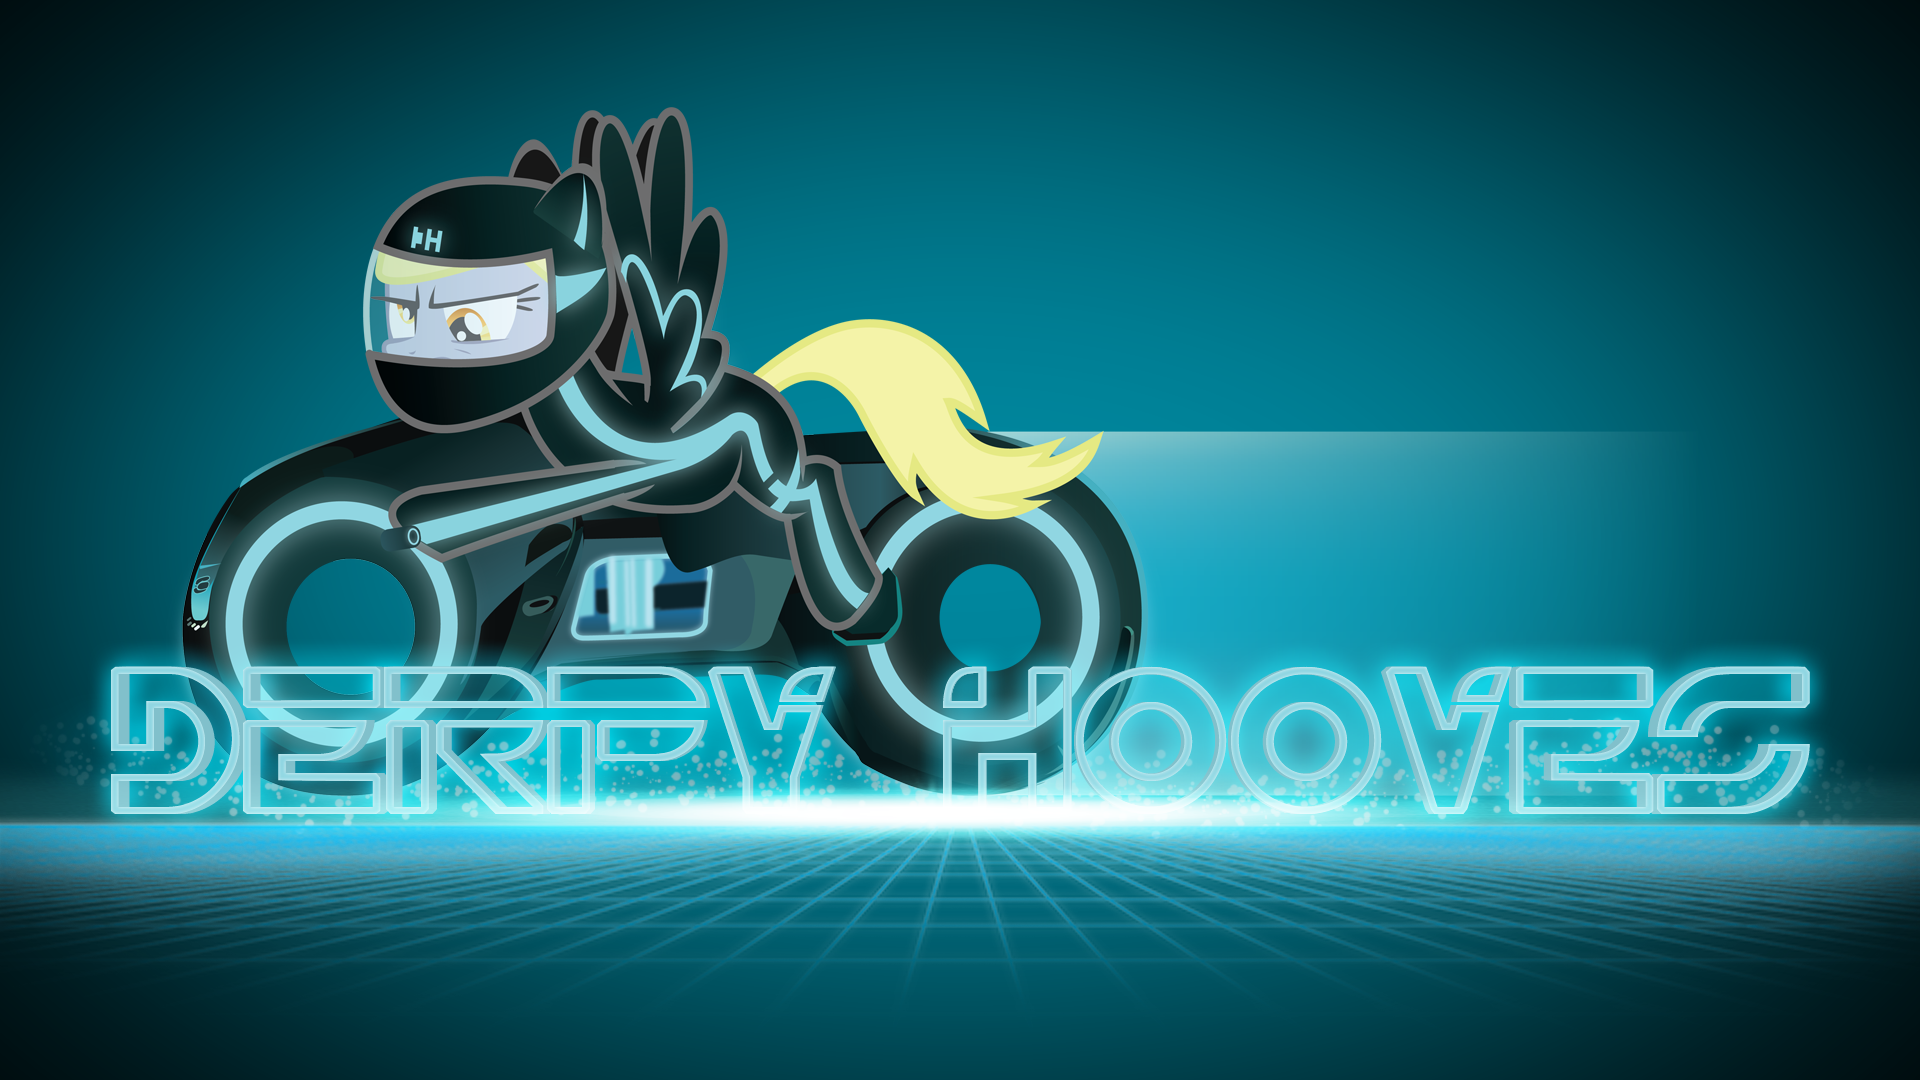 Derpy Hooves Tron Wallpaper by BlueDragonHans and Smashinator